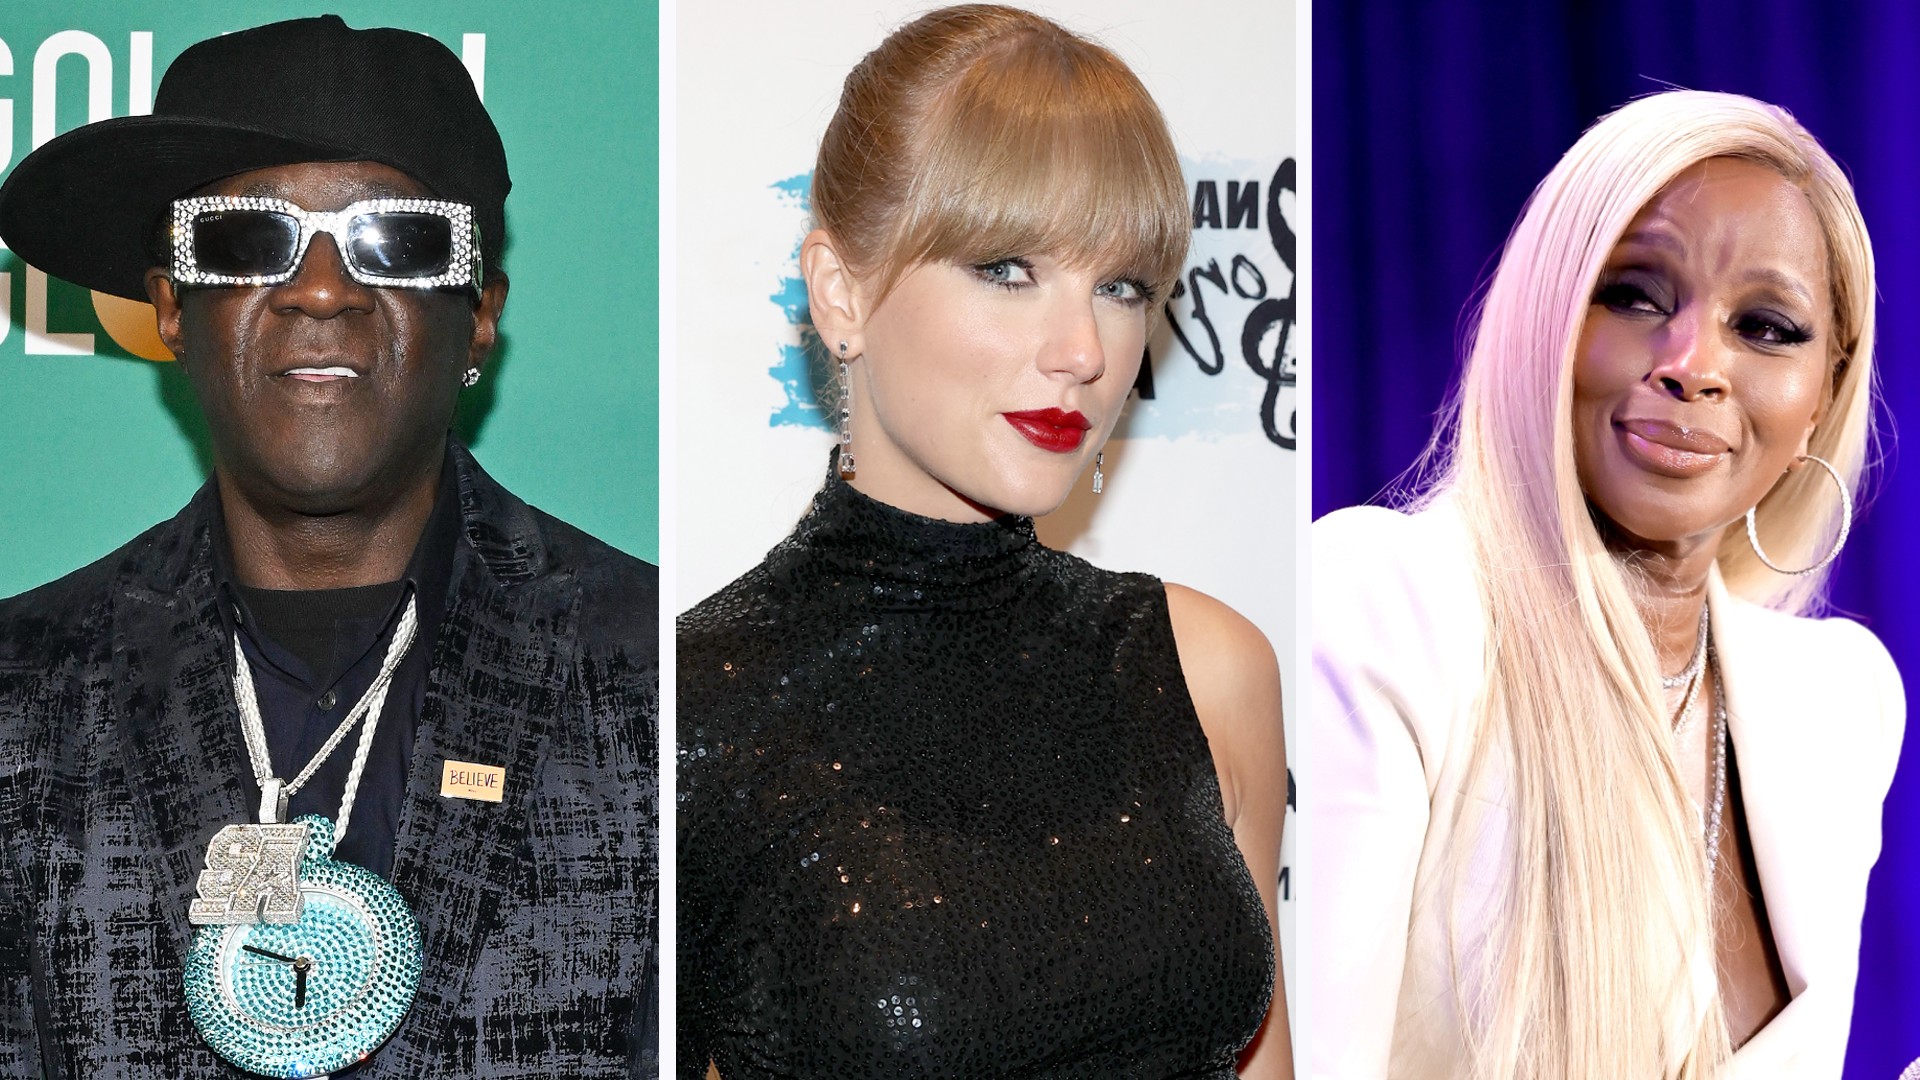 King Of Swiftie- Flavor Flav Compares Taylor Swift's Music To Mary J. Blige